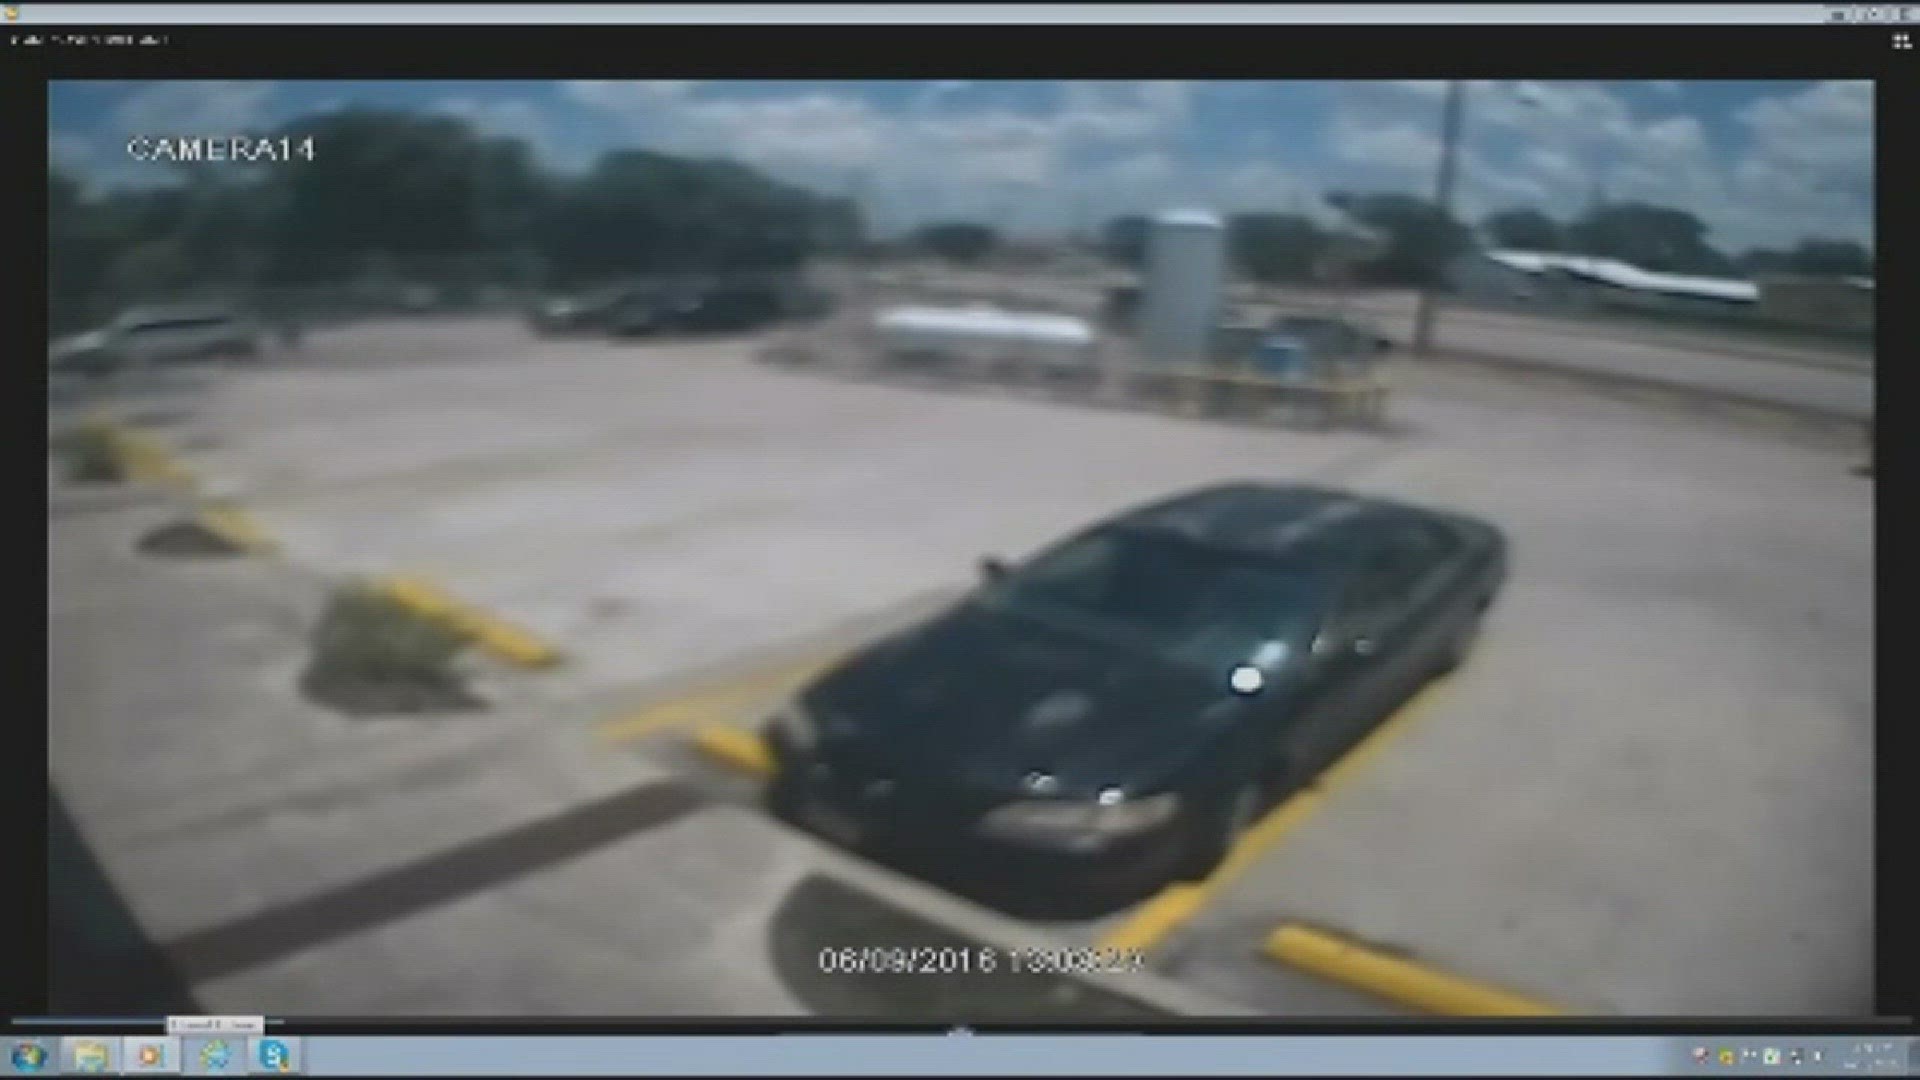 Surveillance video captured the plane crash that killed three people near Hobby Airport on June 9, 2016. Warning - the video is difficult to watch.